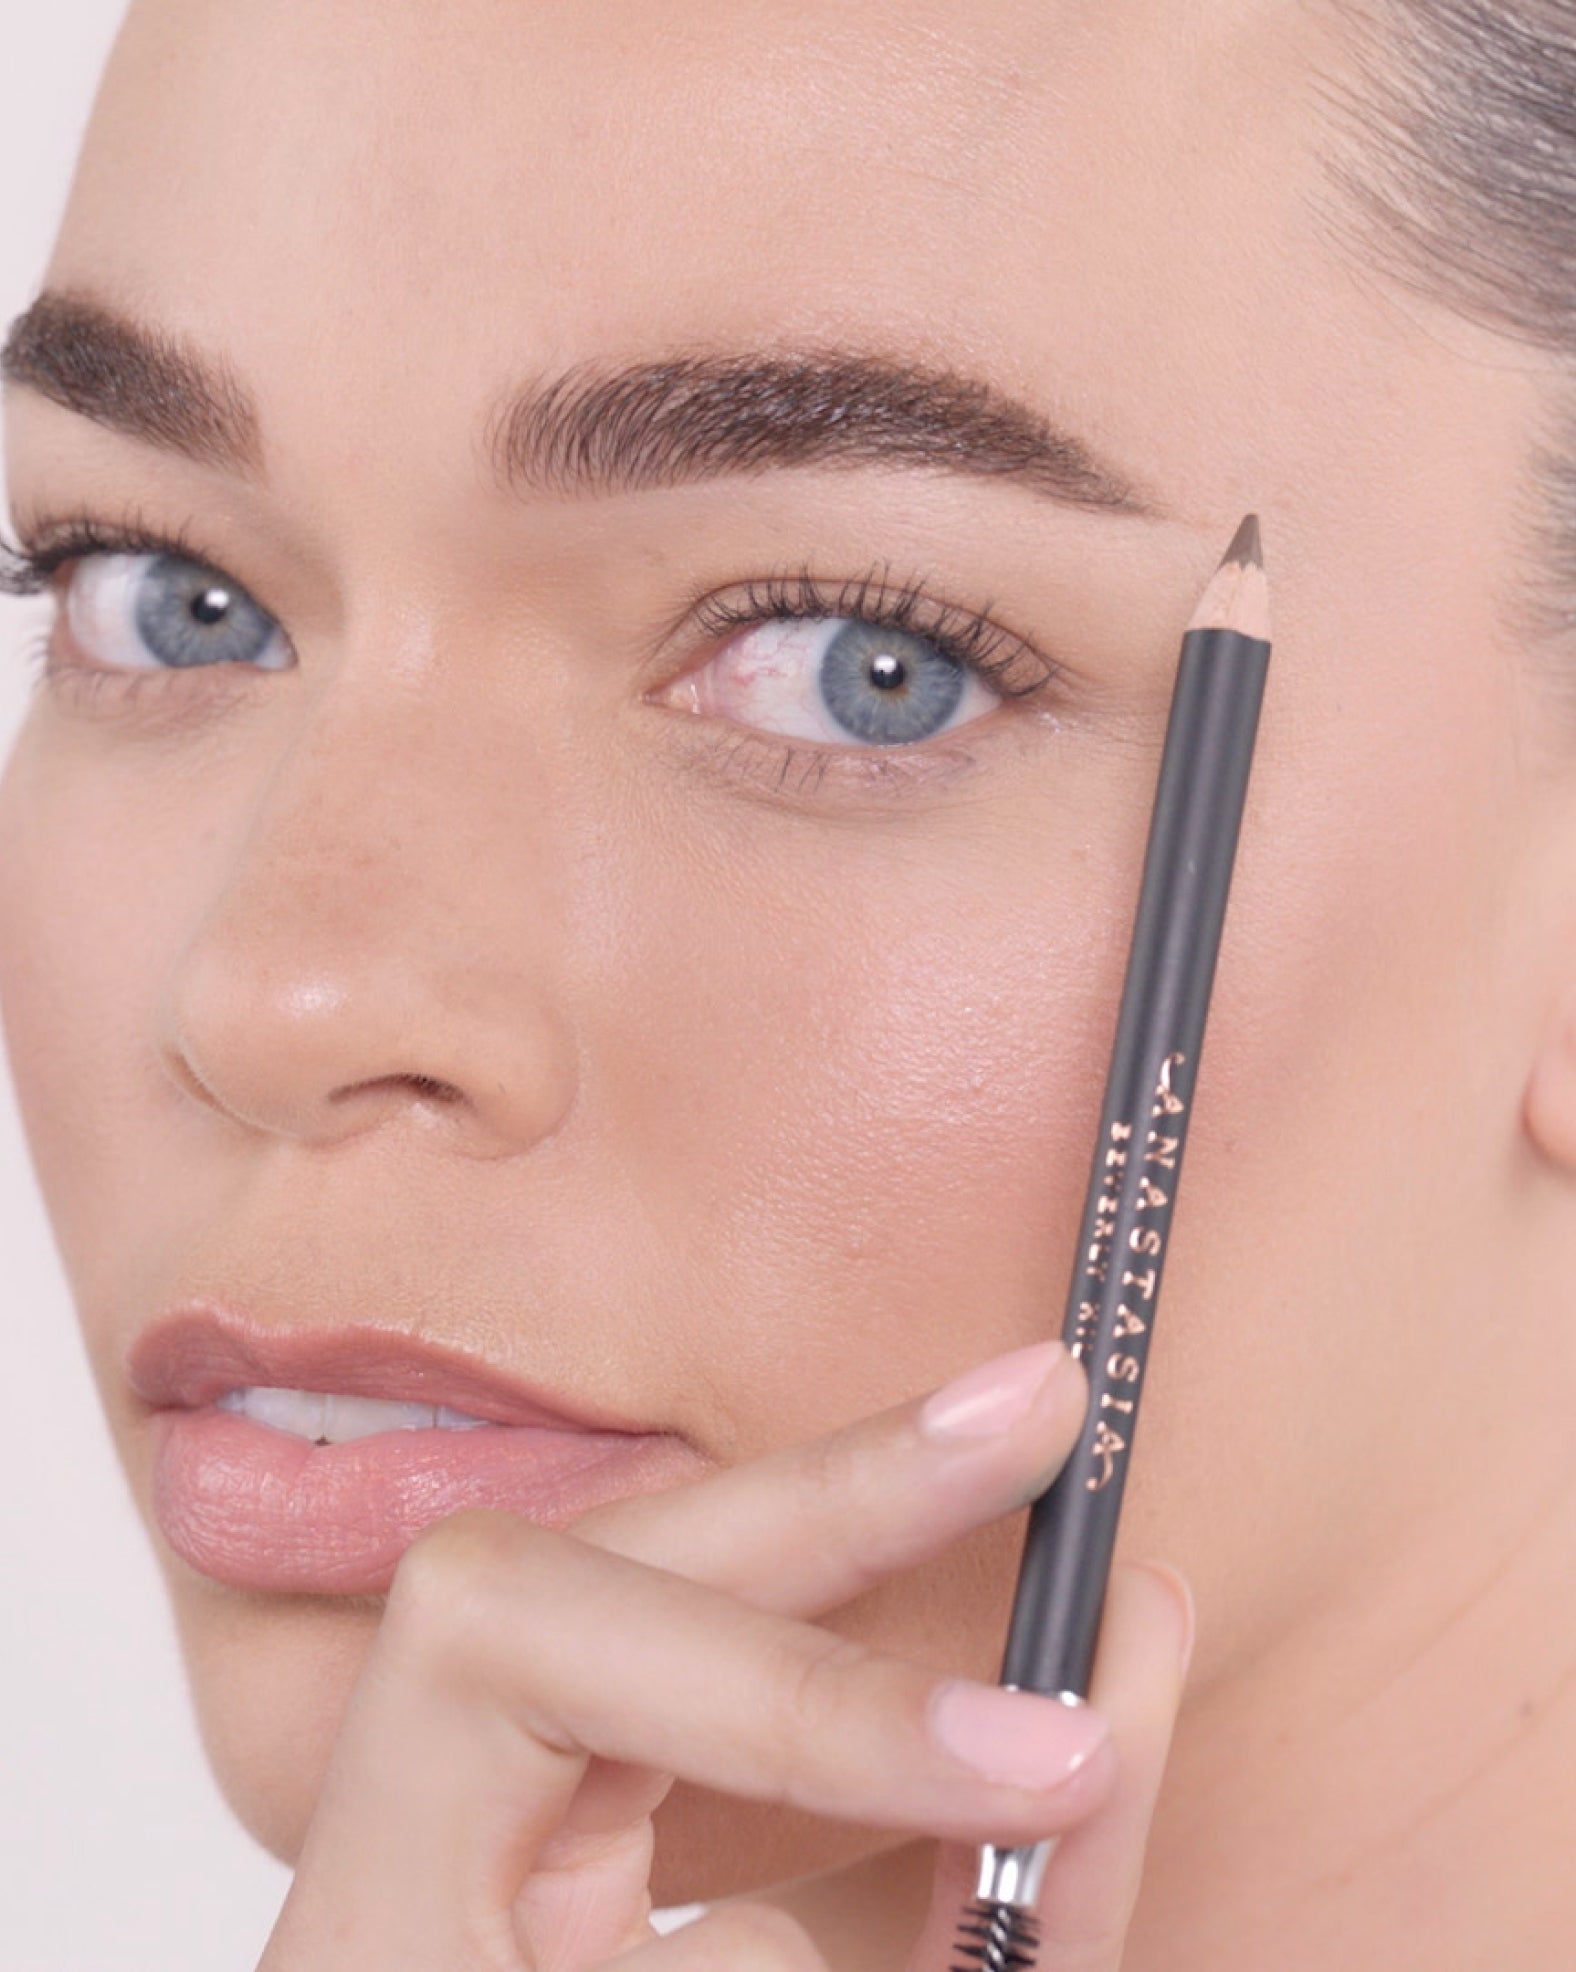 Applying Perfect Brow Pencil in Soft Brown